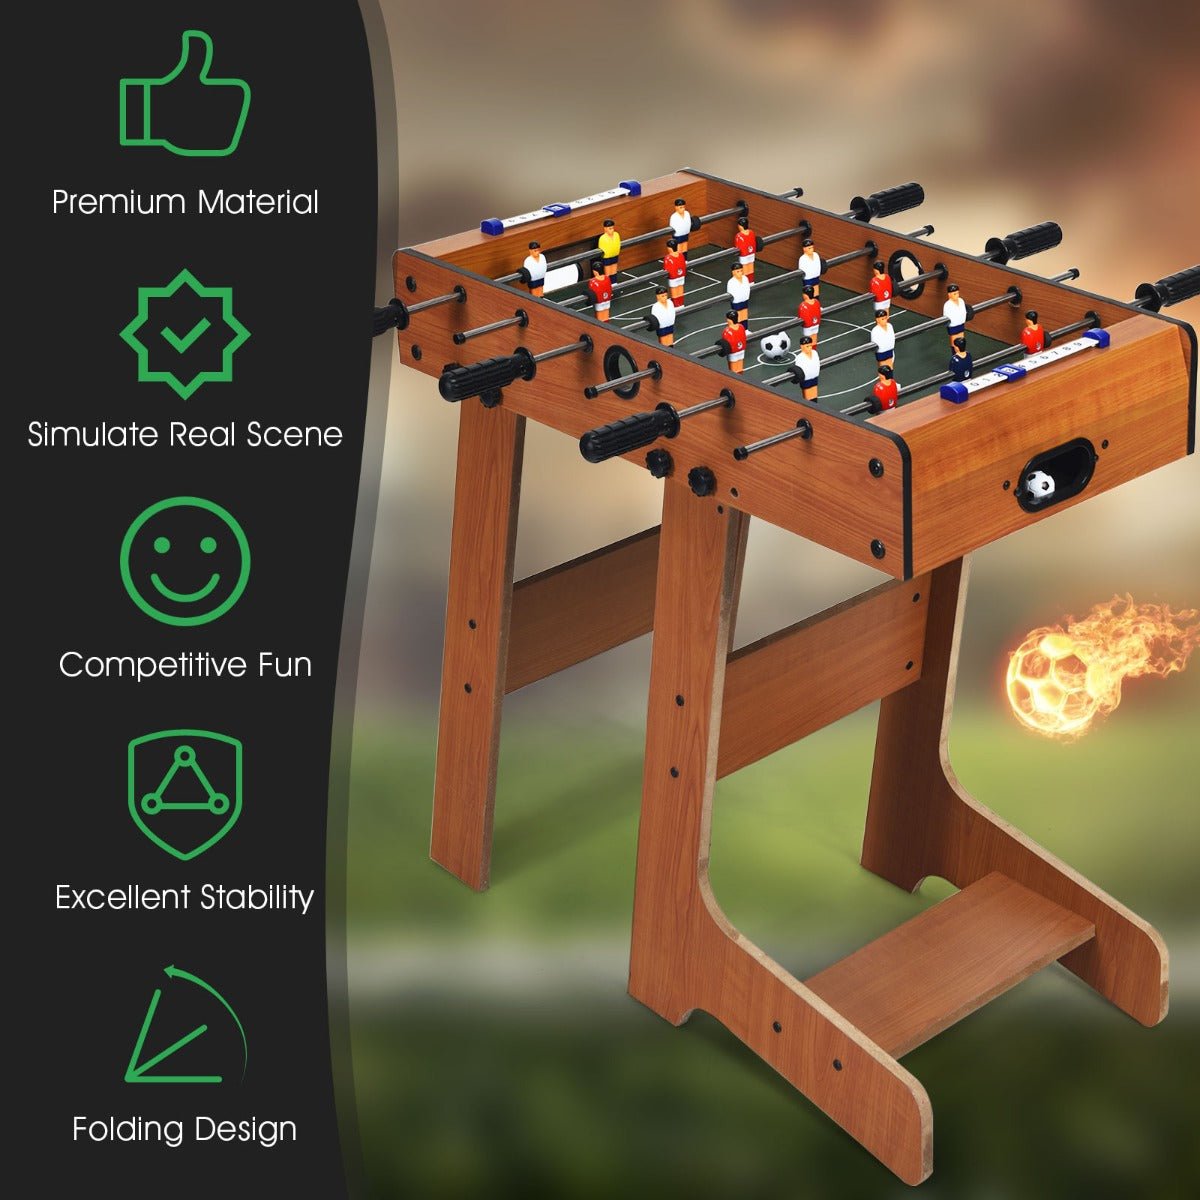 Upgrade Your Game Room with the Foosball Table - Buy Now!